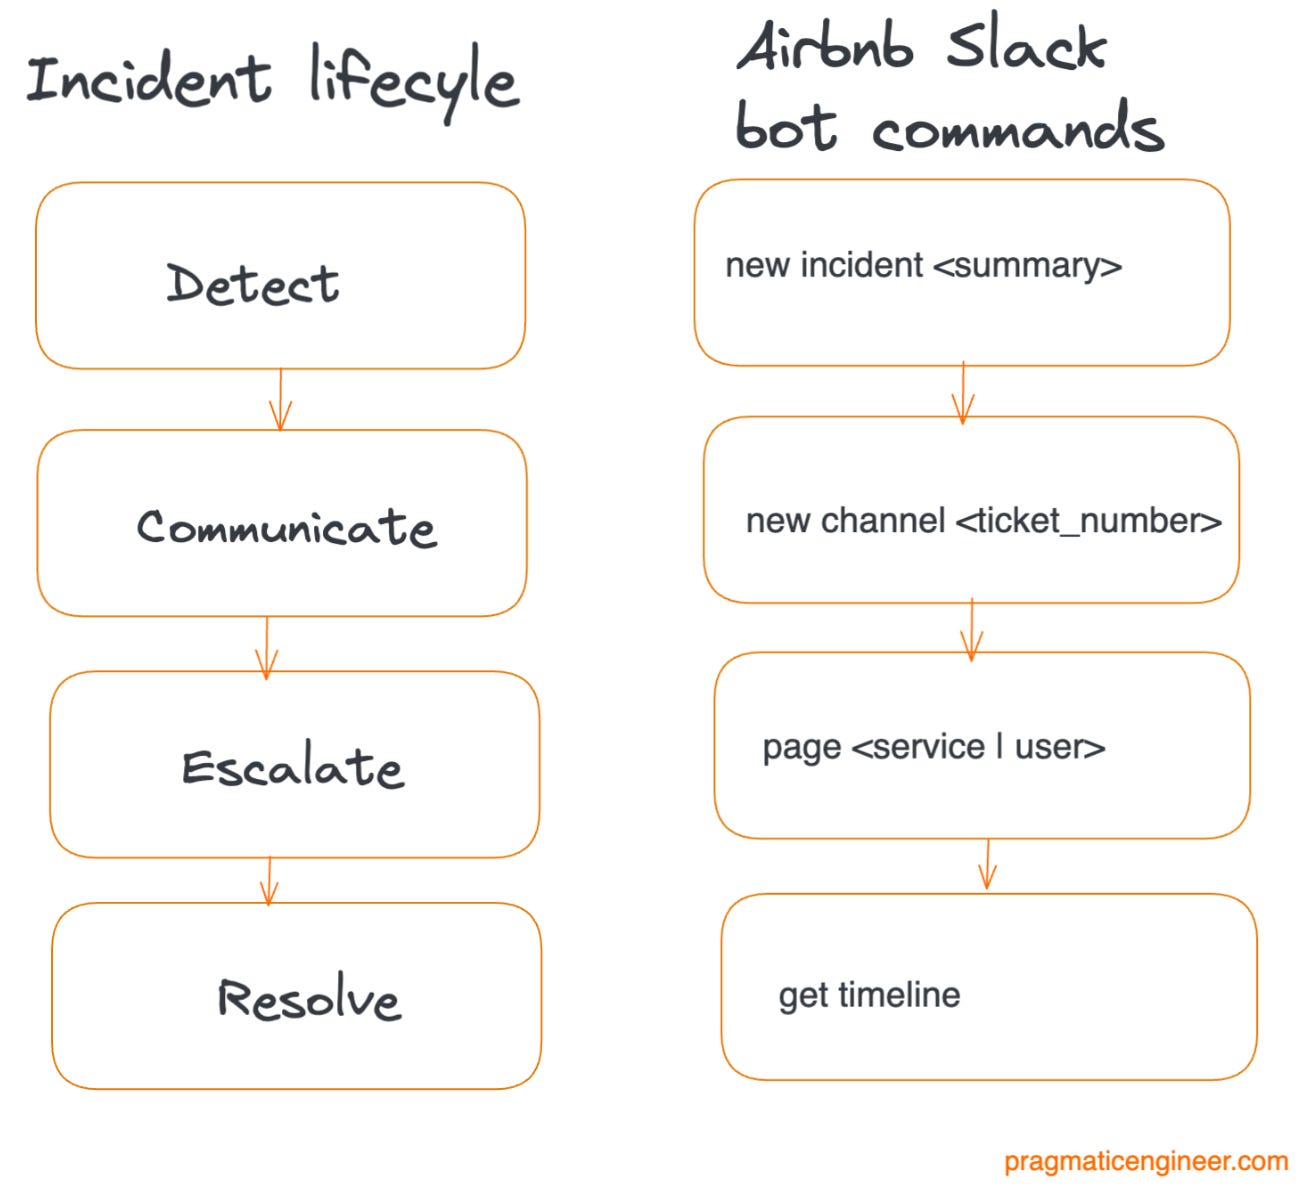 Incident lifecycle and bot commands at Airbnb